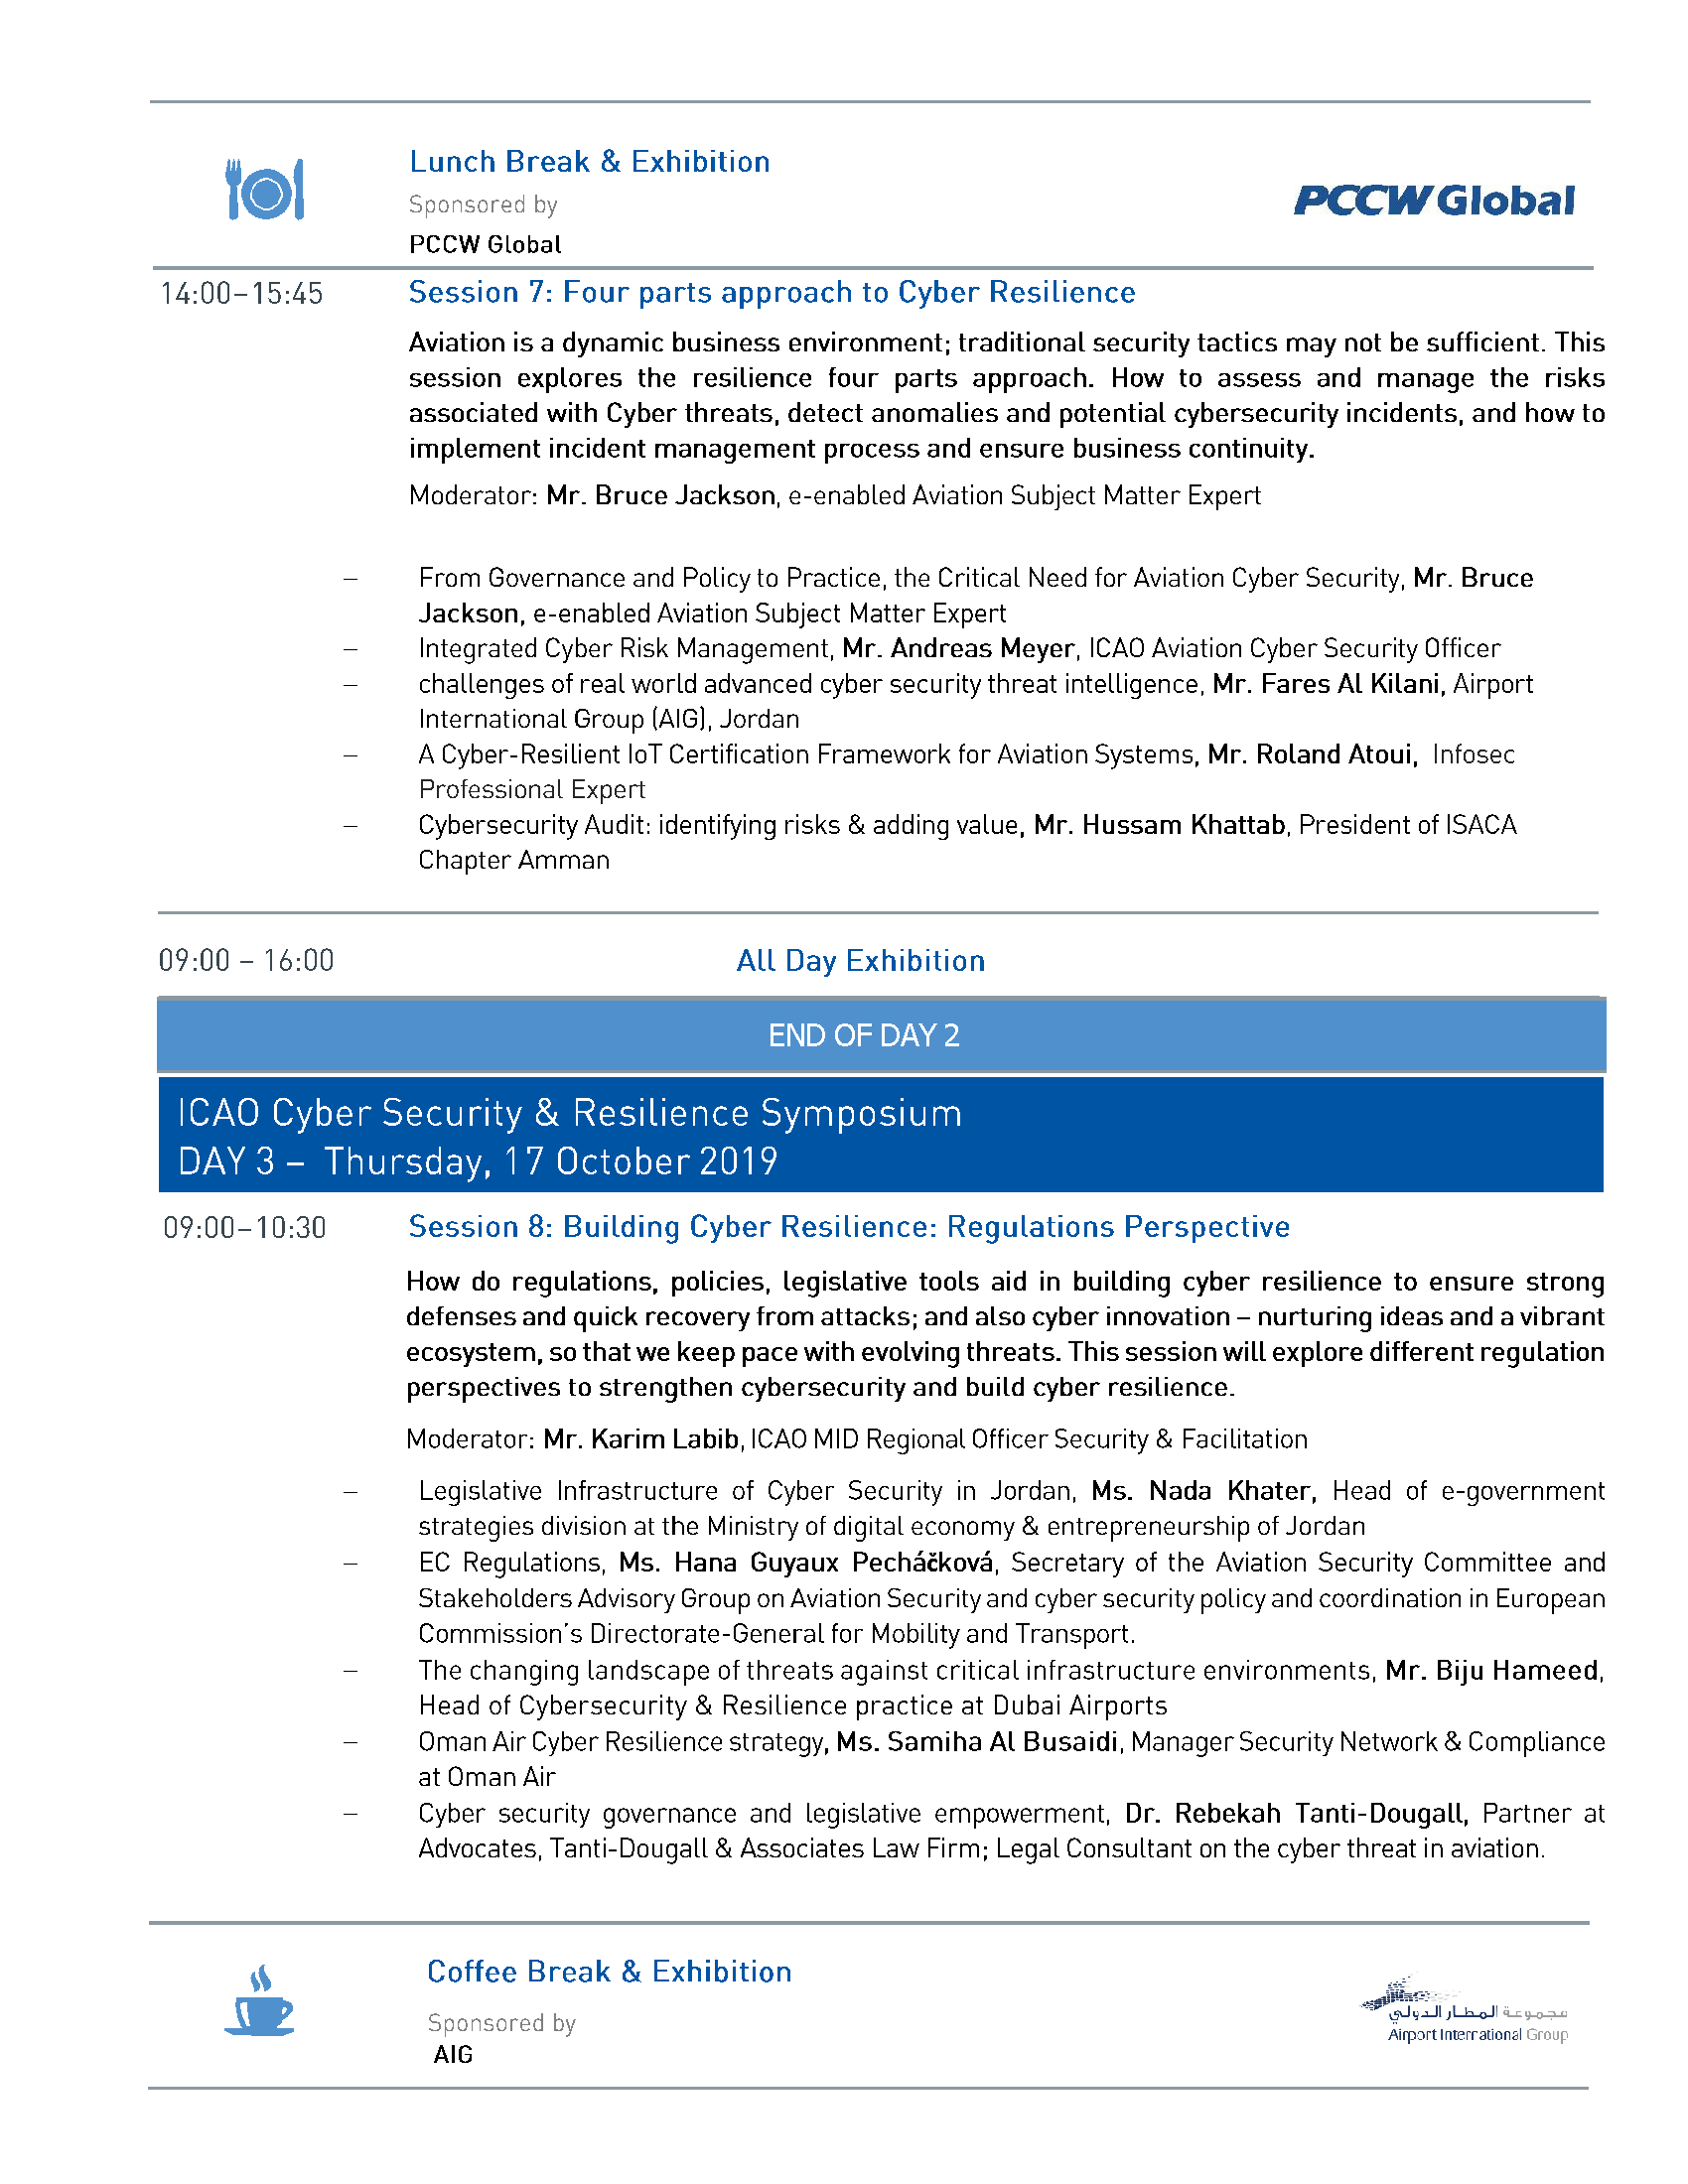 ICAO Cybersecurity and Resilience Symposium 12 Oct 2019_Page_4.png